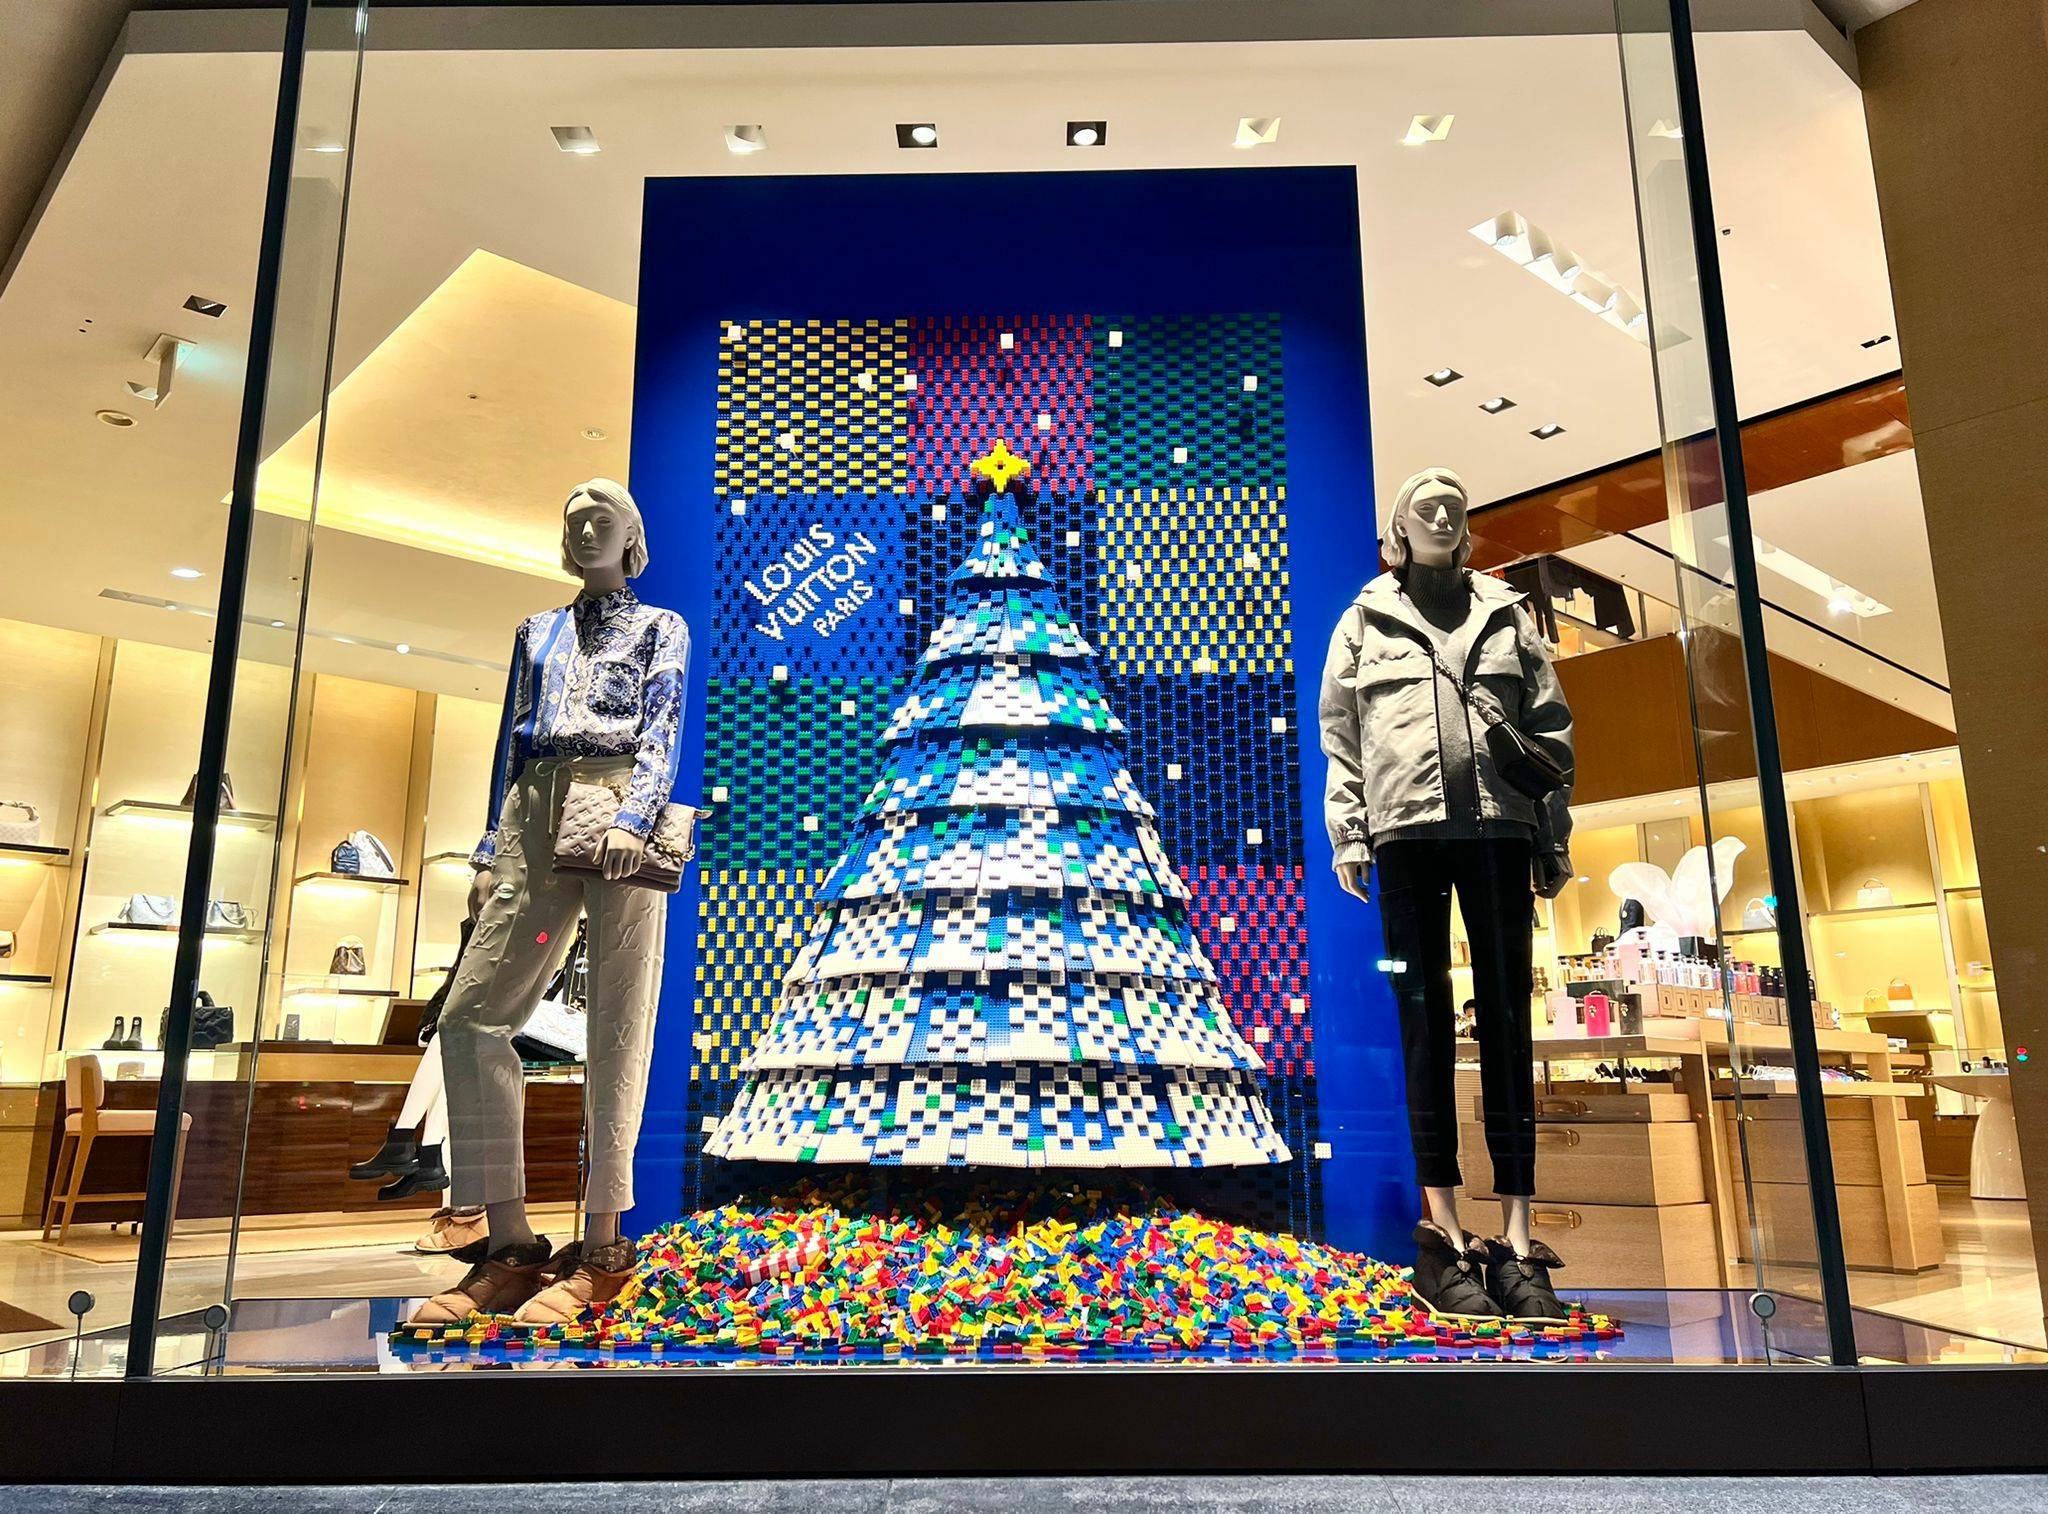 LOUIS VUITTON COLLABORATES WITH MASTER LEGO® BUILDERS FOR THE 2022 HOLIDAY  SEASON - Numéro Netherlands